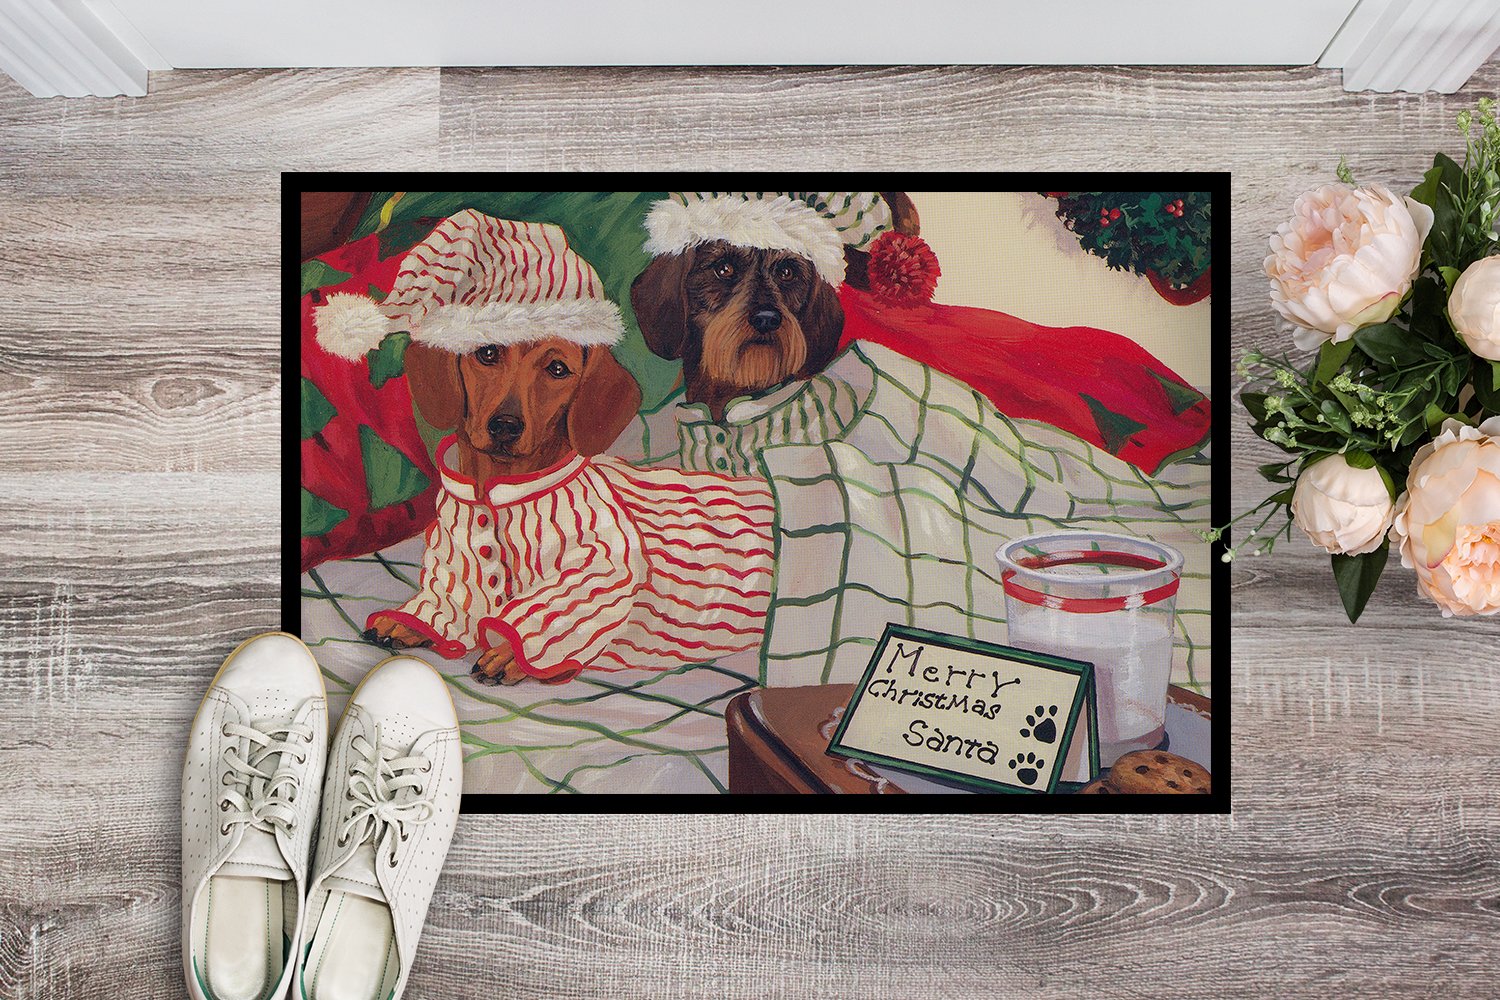 Dachshund Christmas Waiting for Santa Indoor or Outdoor Mat 24x36 PPP3260JMAT by Caroline's Treasures